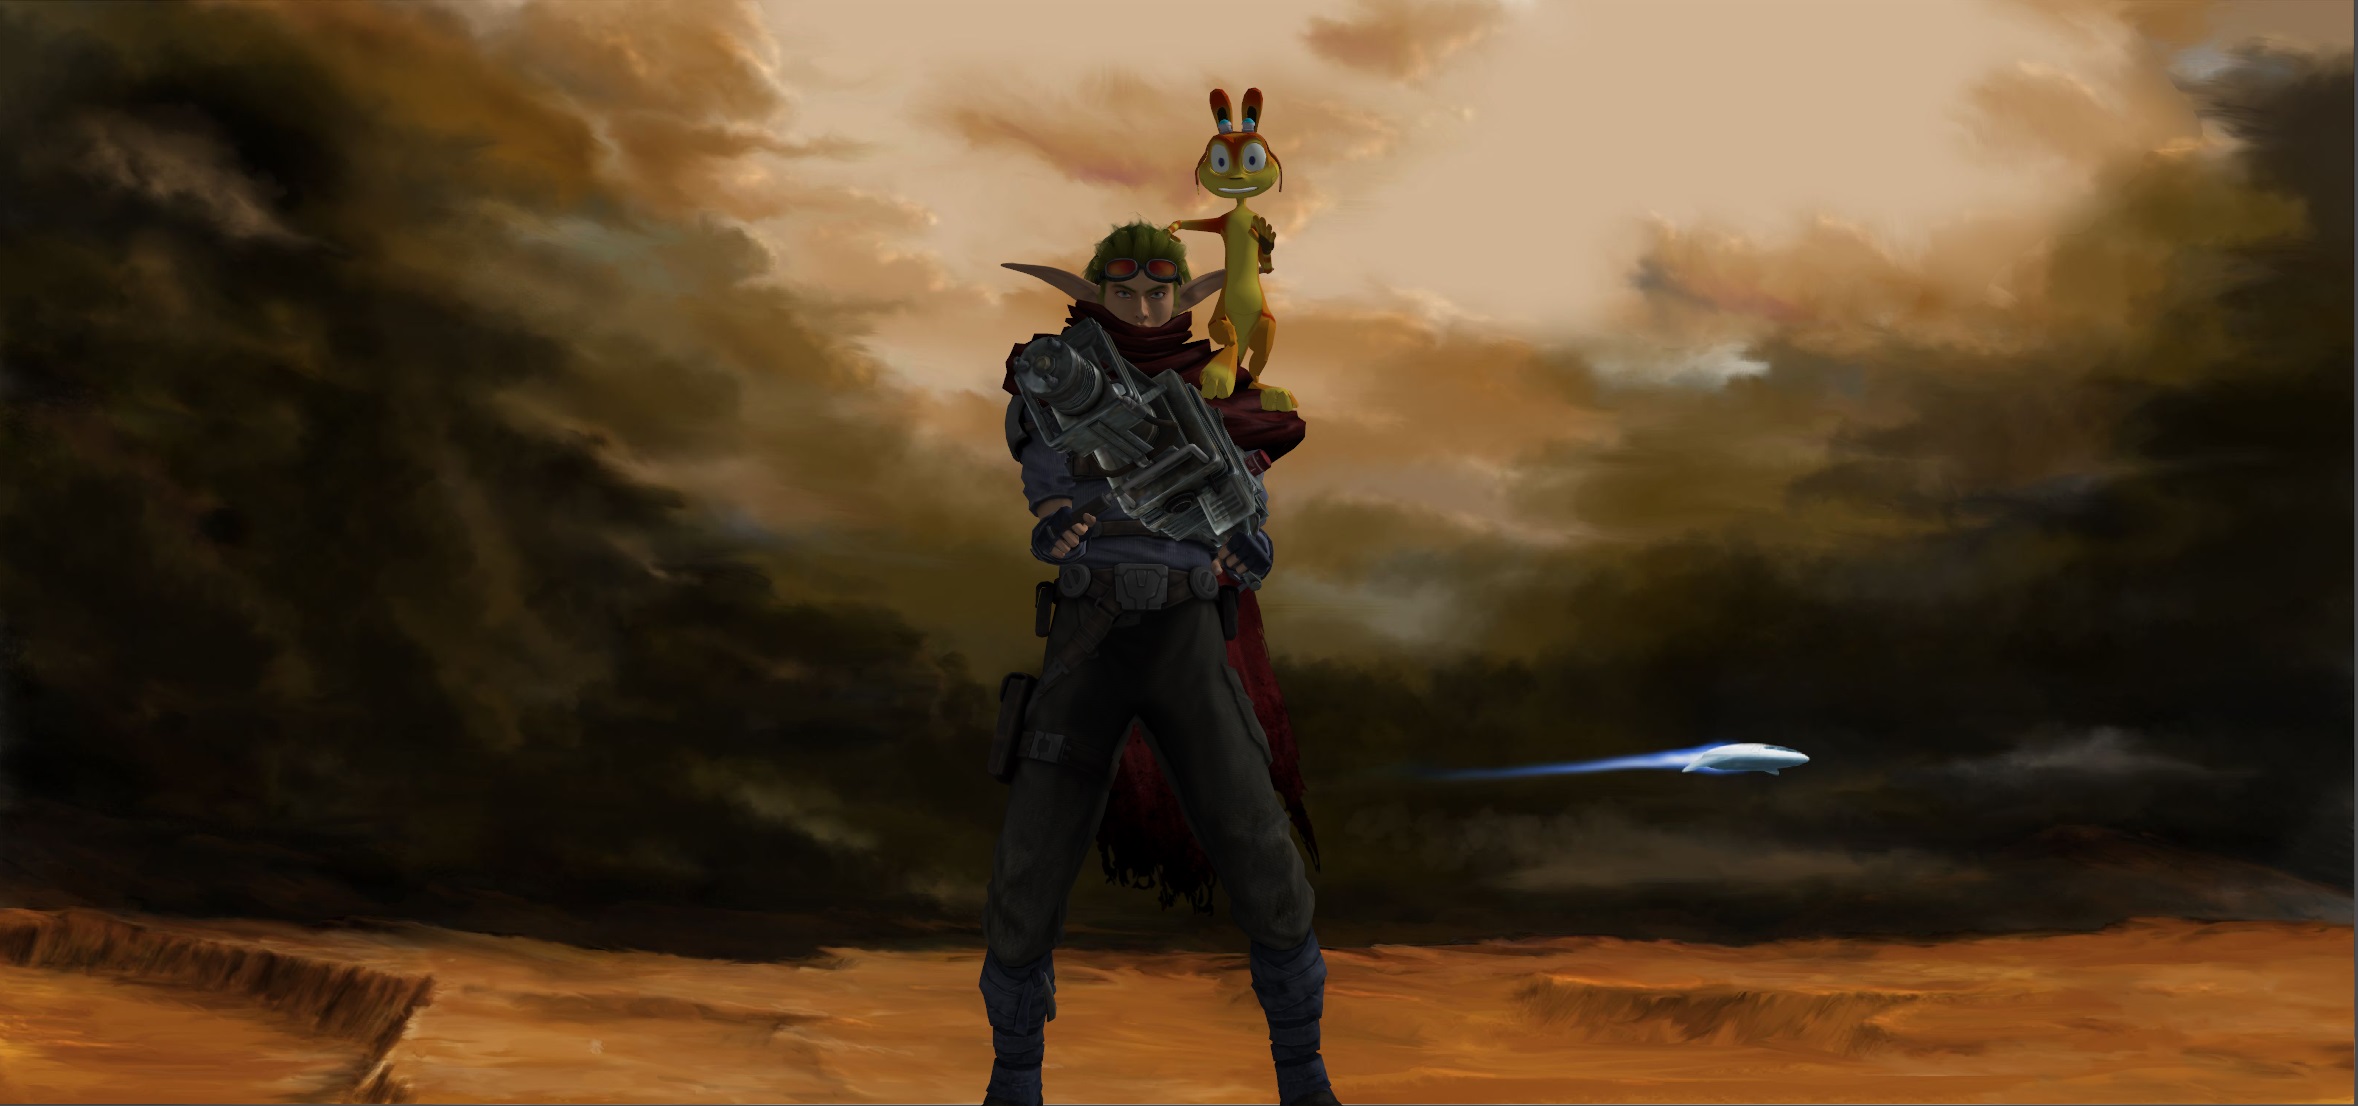 Jak And Daxter Wallpapers  Wallpaper Cave